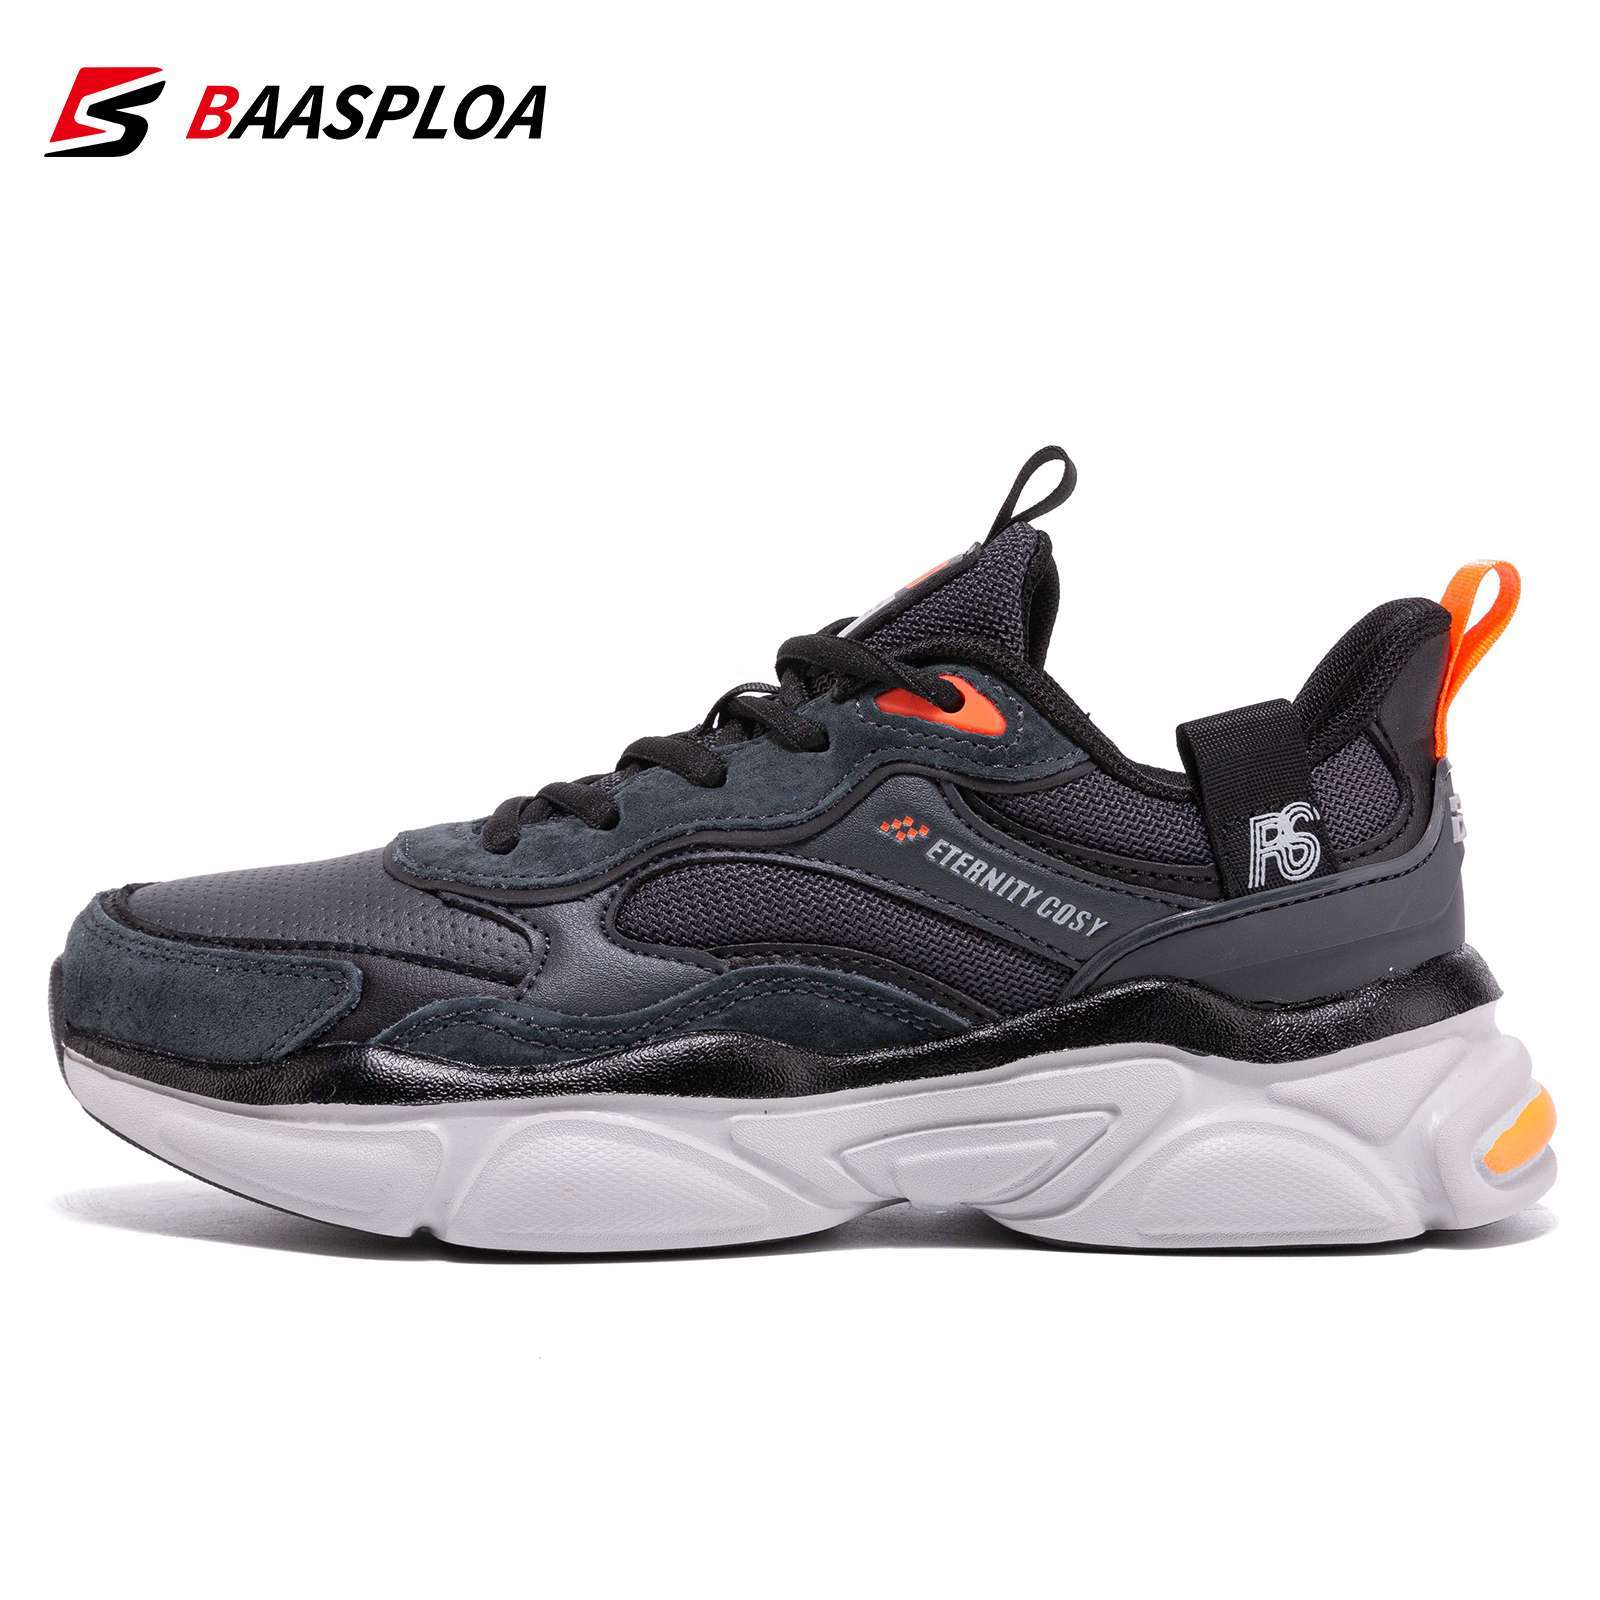 Baasploa New Fashion Women s Walking Shoes Lightweight Sports Shoes Non slip Leather Comfortable Female Sneakers 4